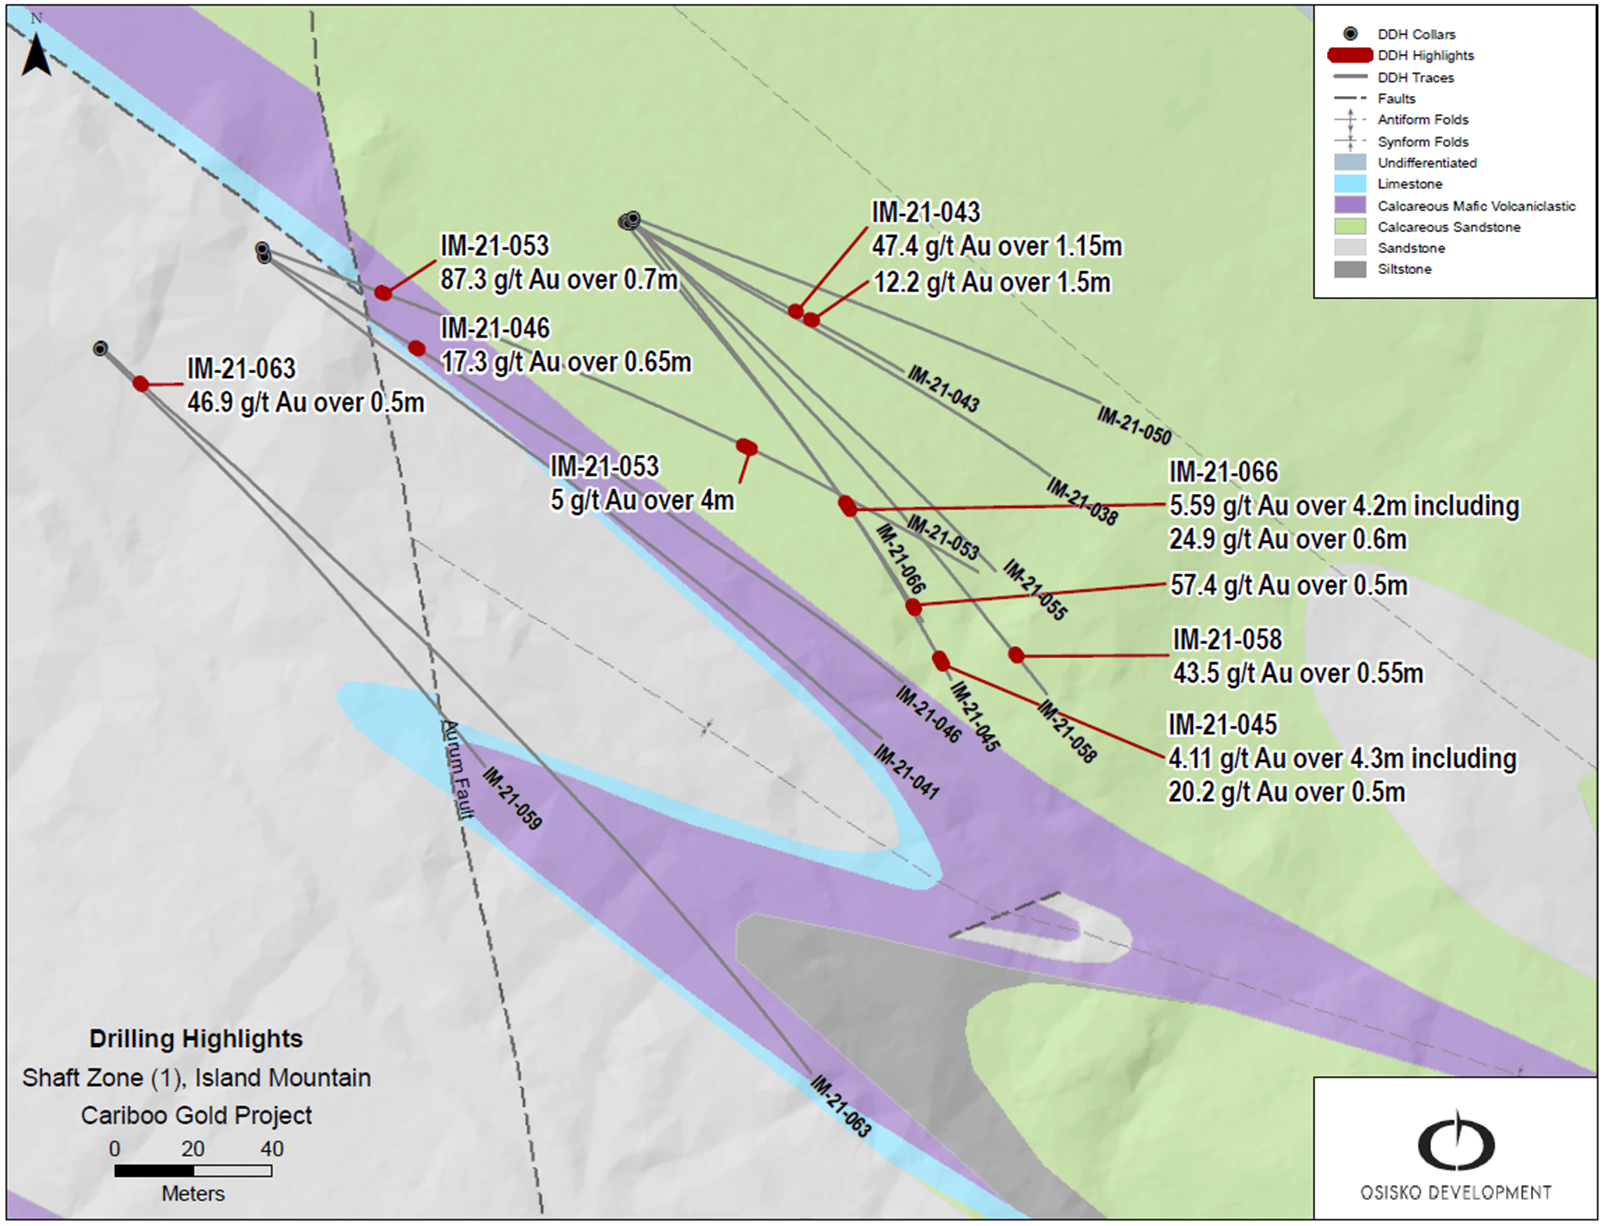 Figure 4: Shaft Zone select drilling highlights